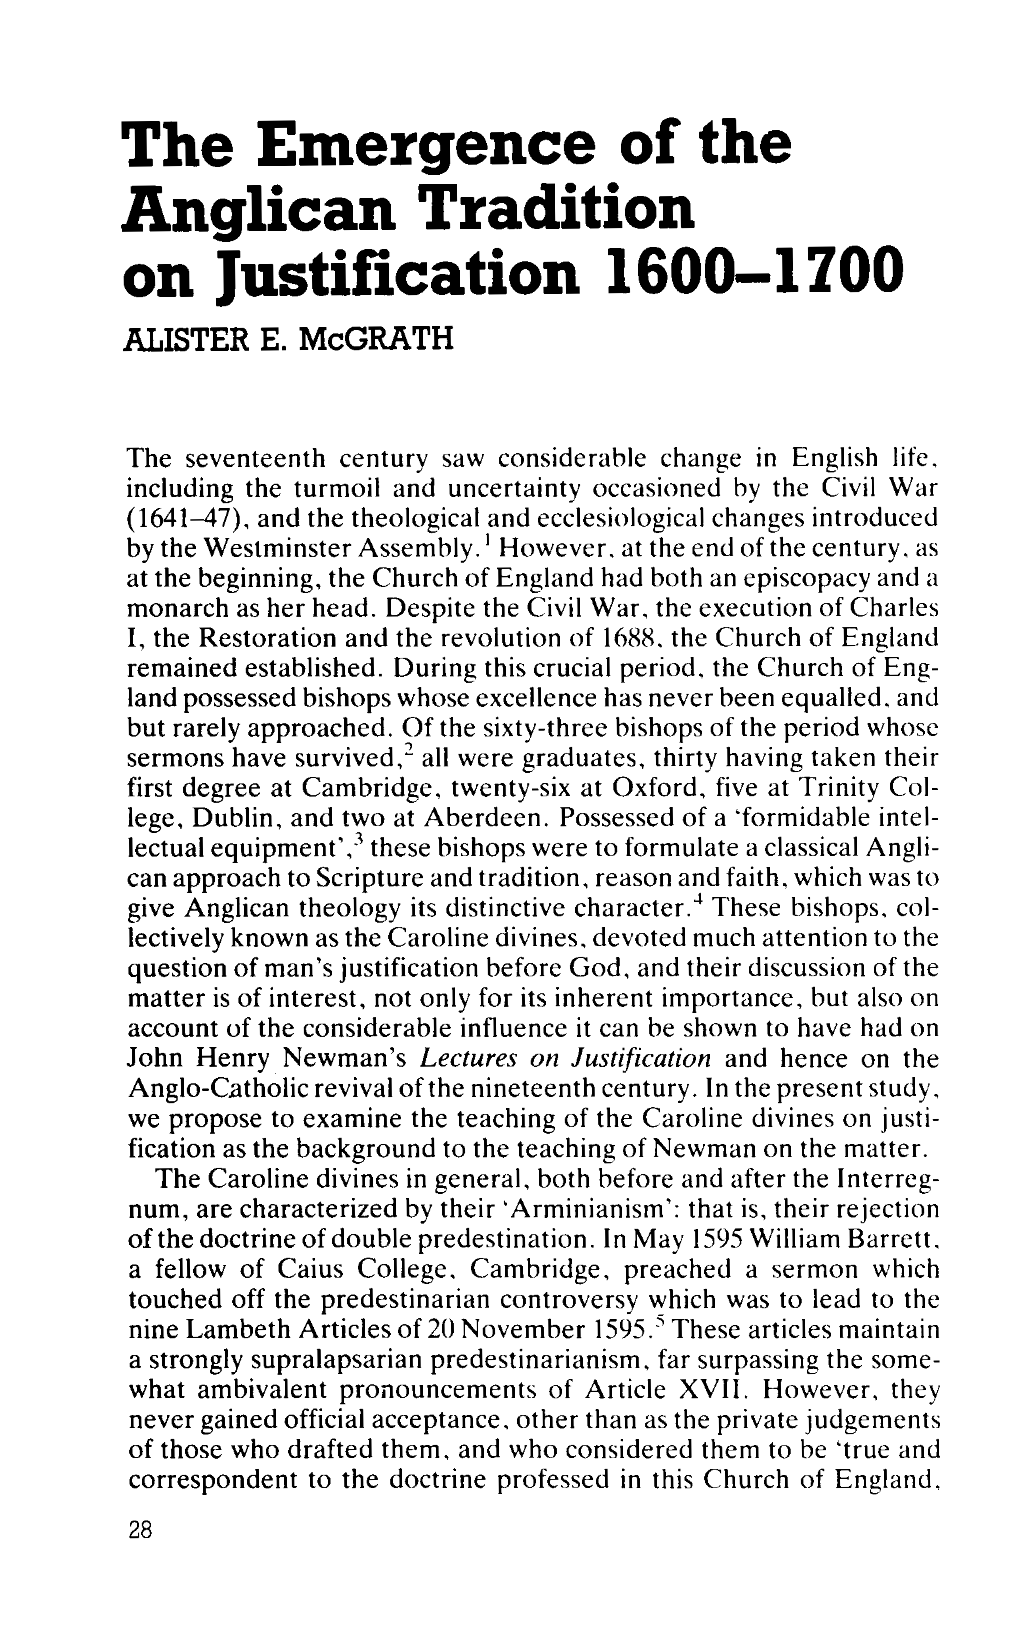 The Emergence of the Anglican Tradition on Justification 1600-1700 ALISTER E